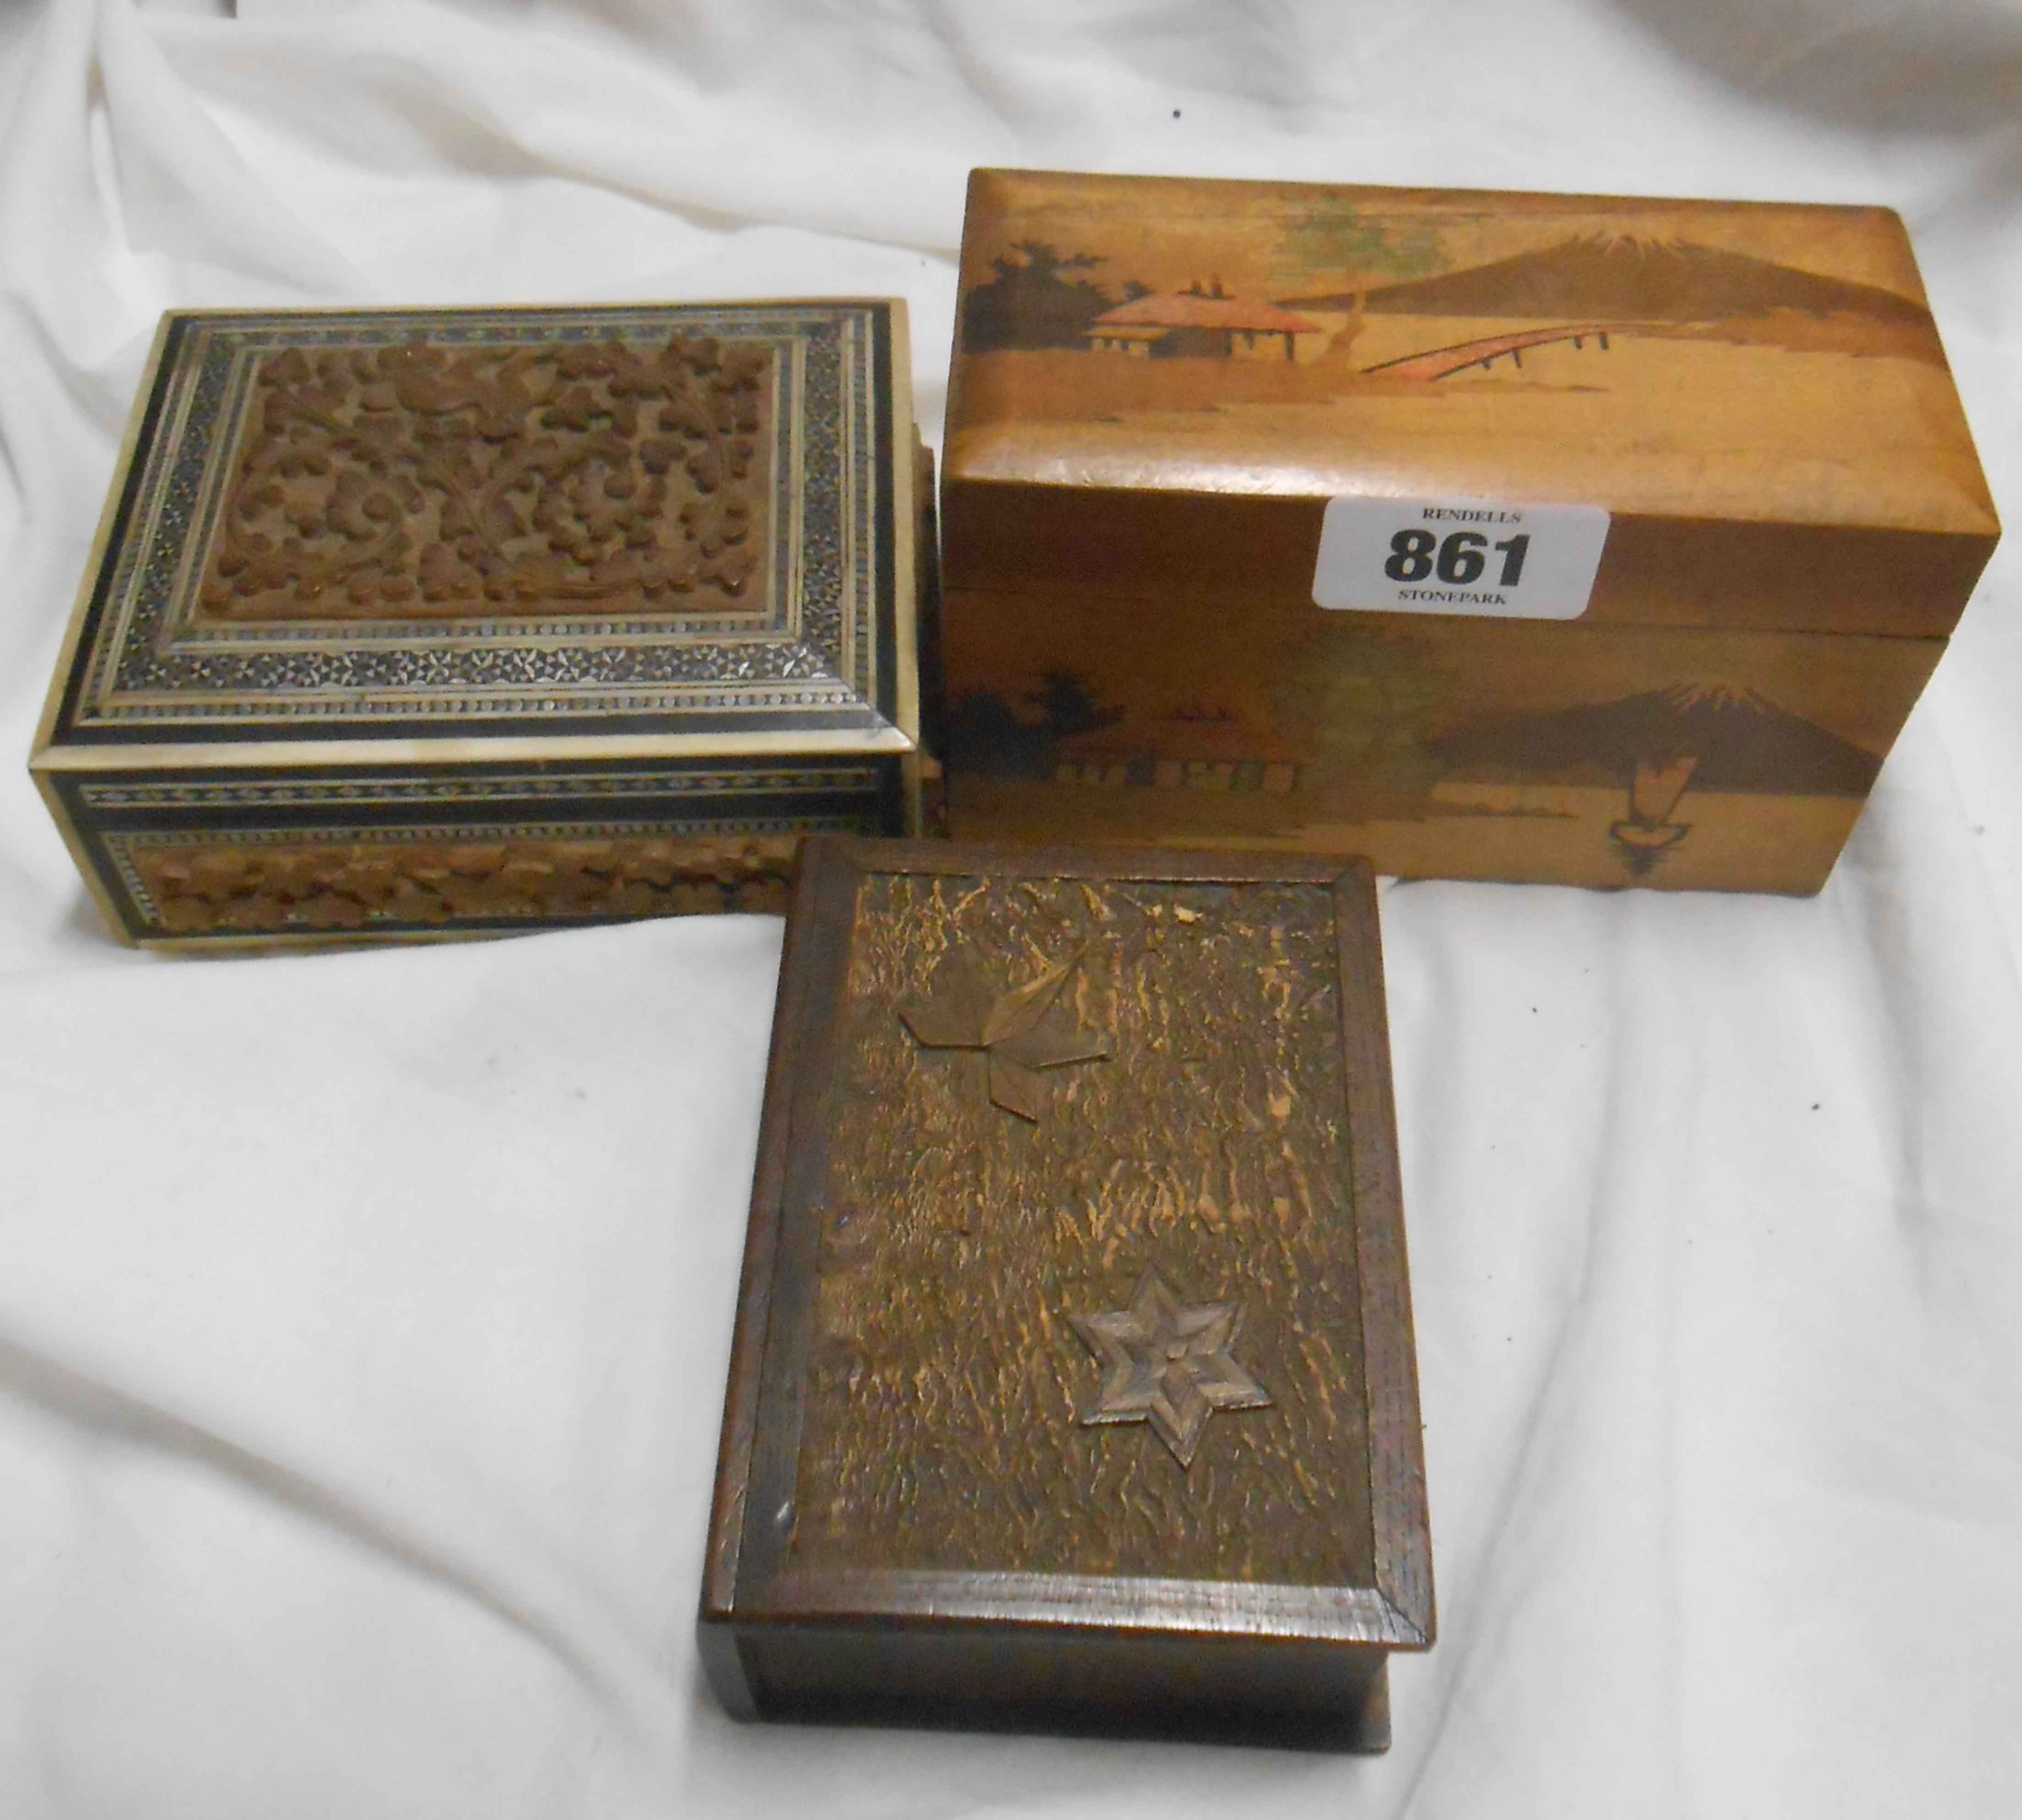 A vintage Oriental cigarette box - sold with two other decorative boxes and a faux tortoiseshell